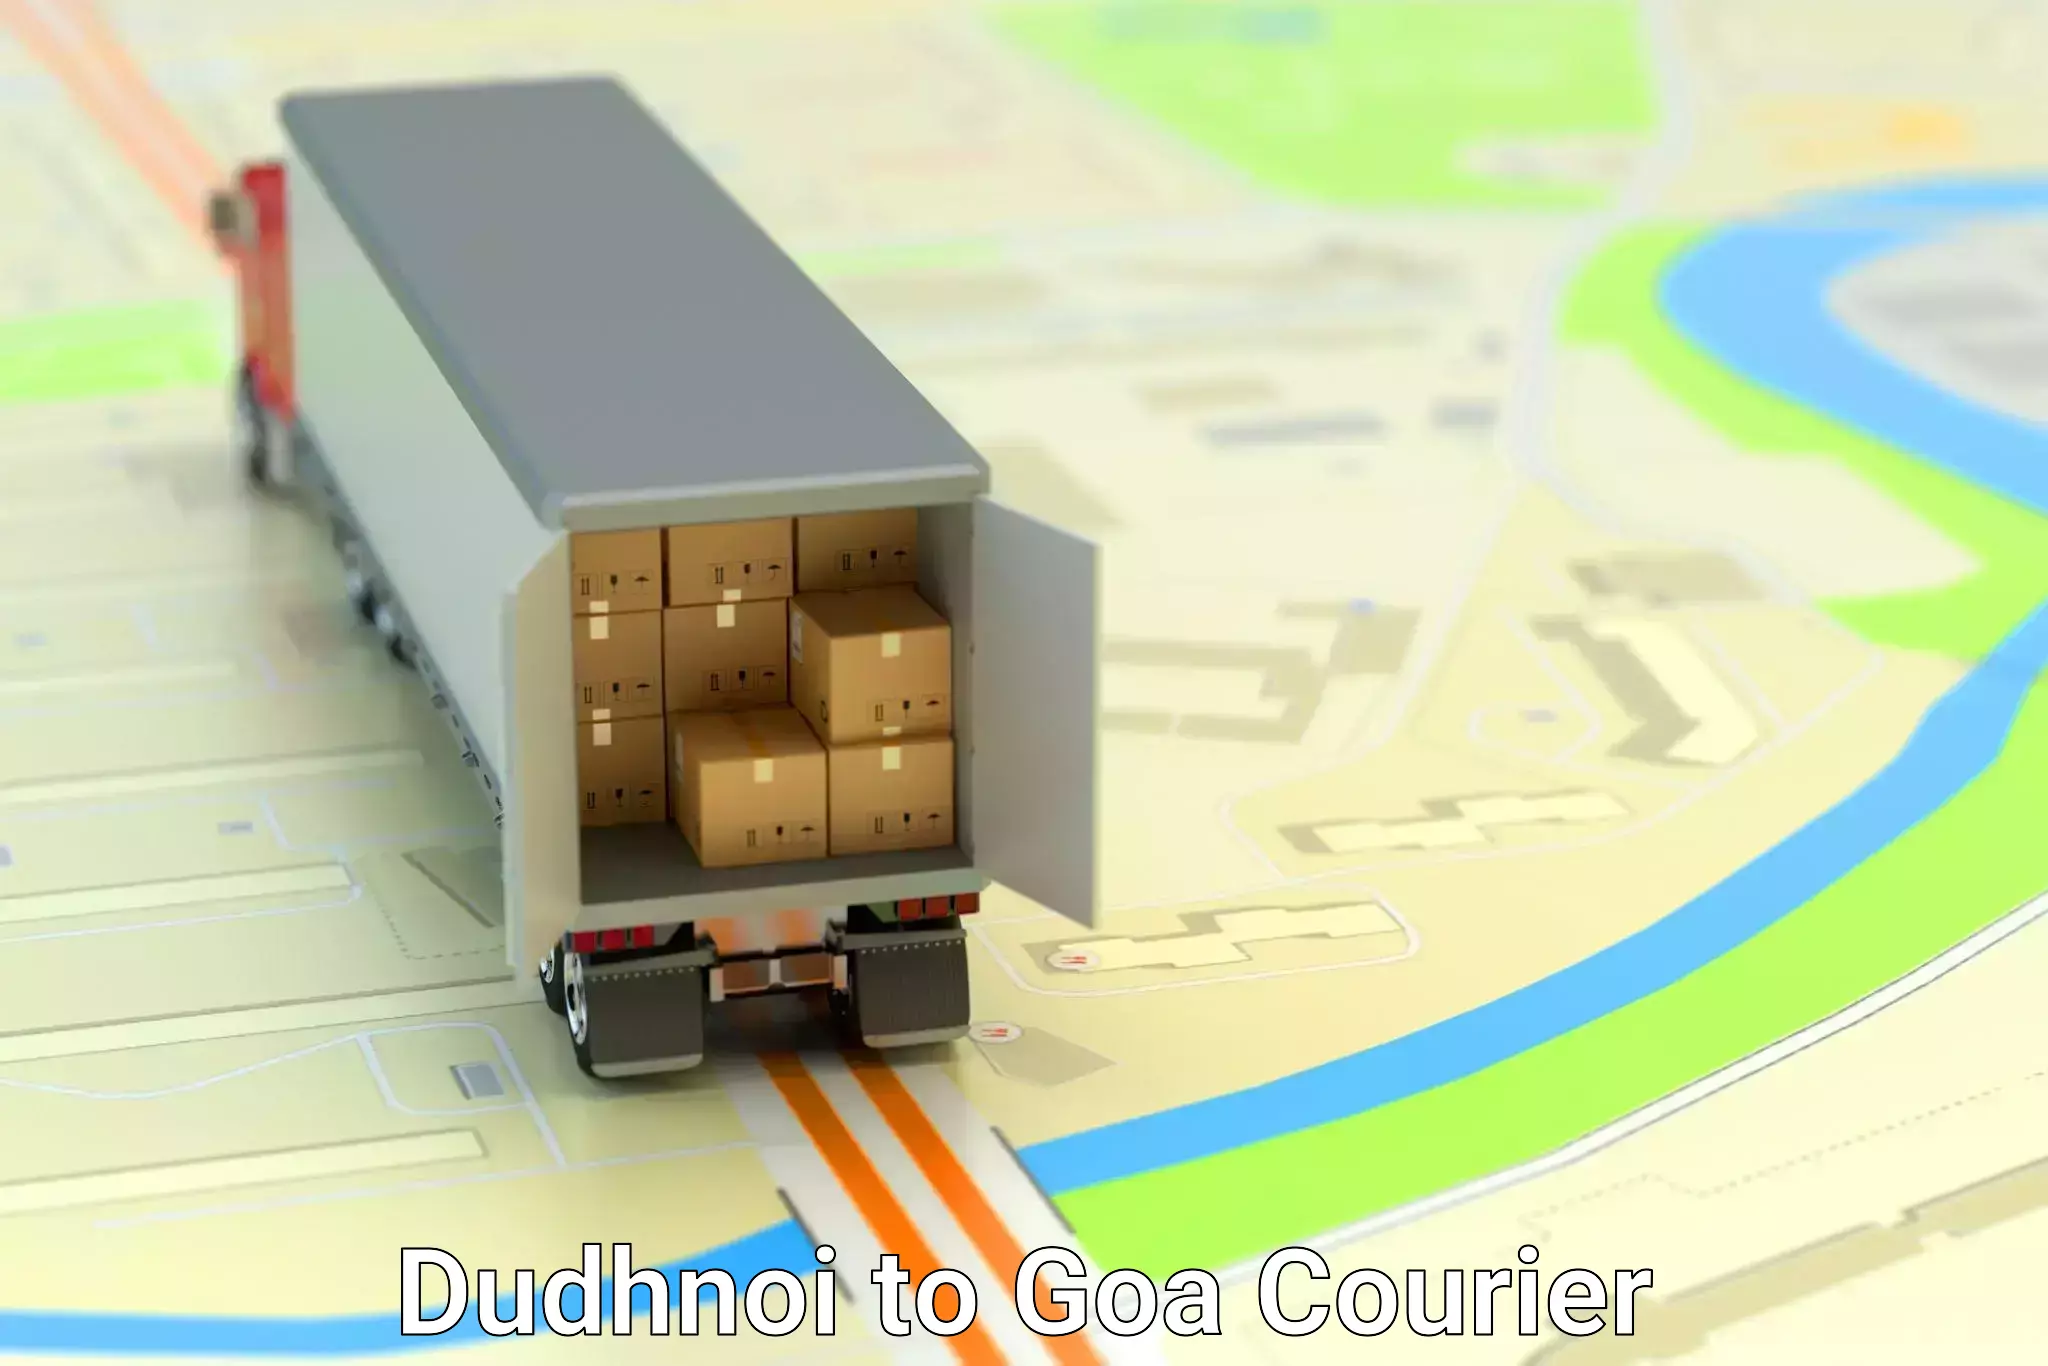 State-of-the-art courier technology Dudhnoi to Panaji